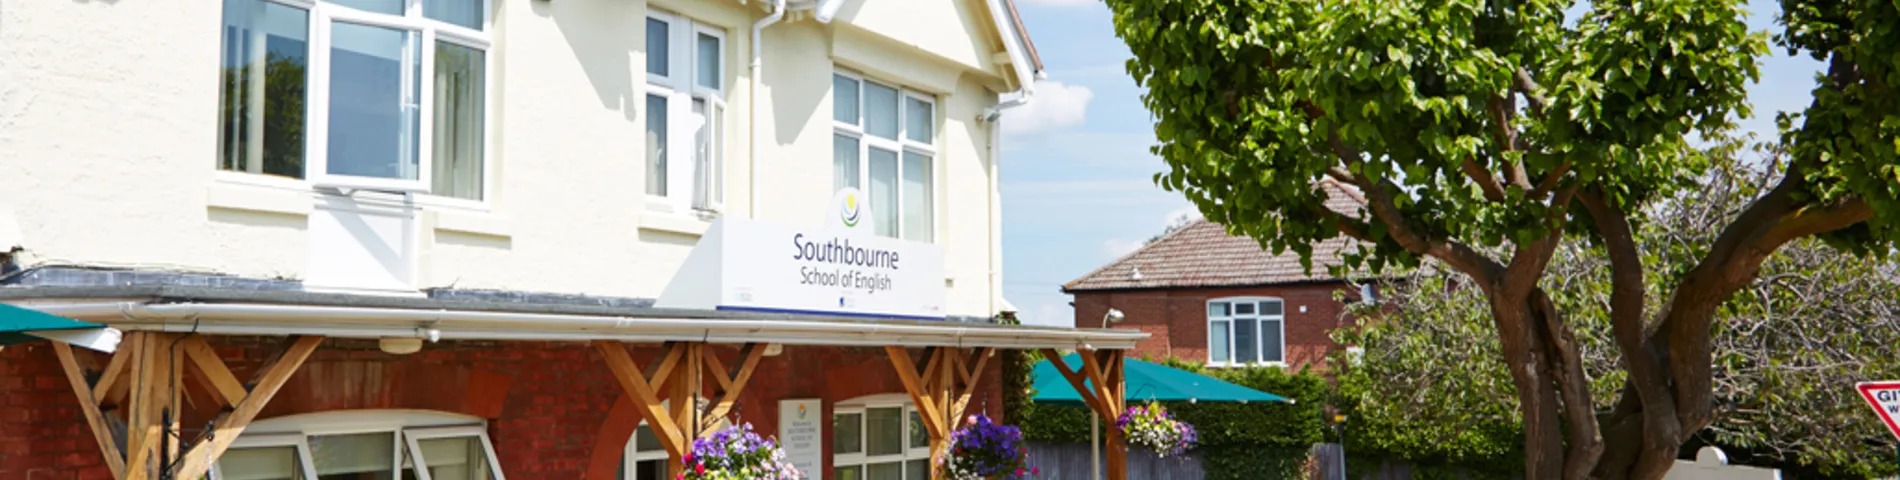 Southbourne School of English foto 1